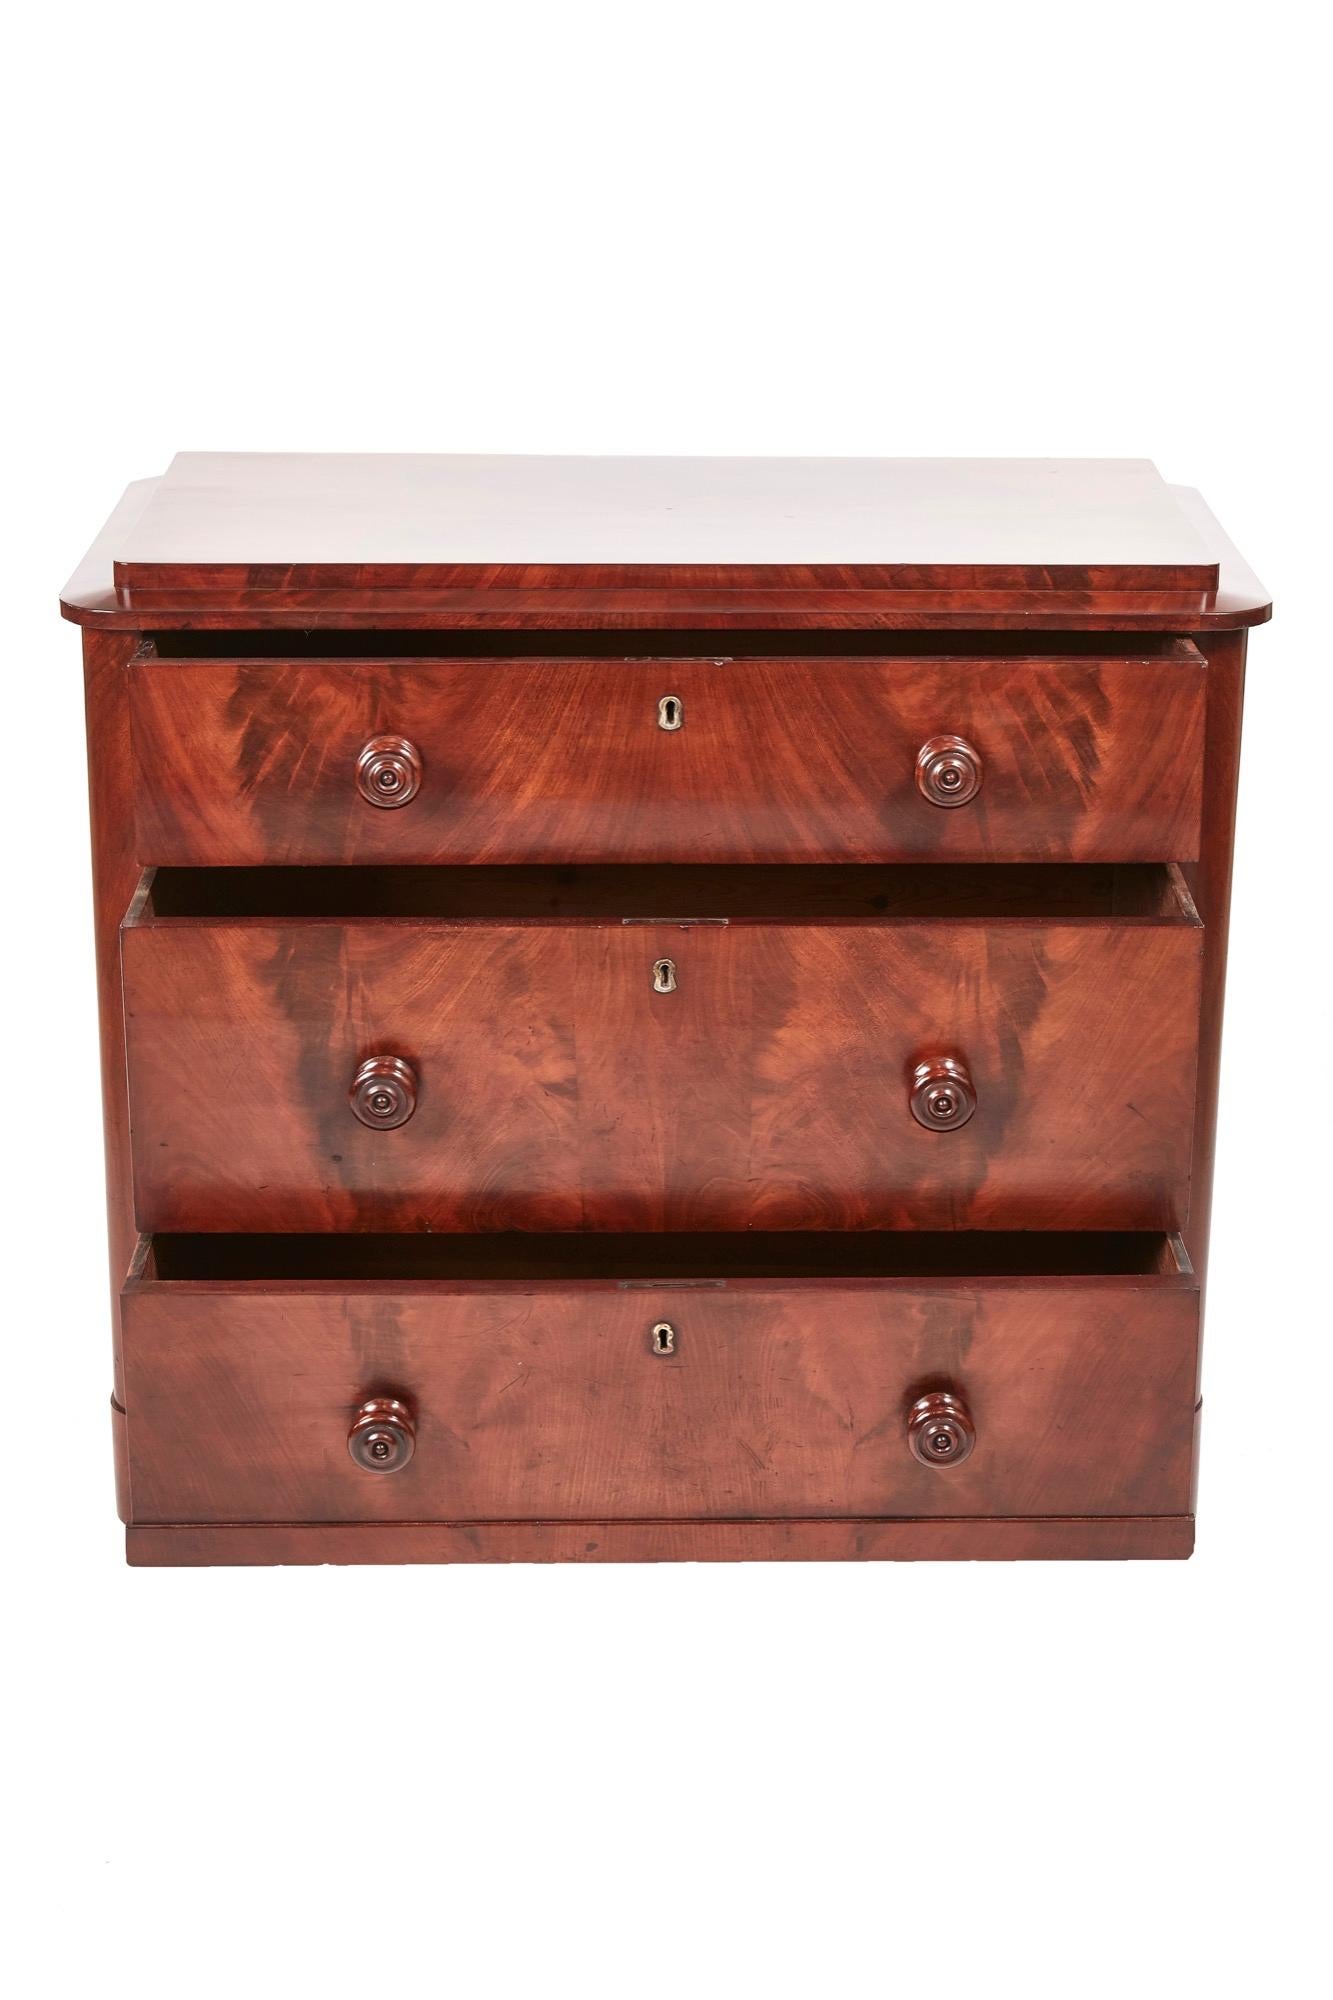 Antique mahogany Biedermeier chest of drawers, with a fantastic mahogany top, three long drawers with original mahogany turned knobs, standing on original shaped block feet
Fantastic color and condition.
Measures: 39